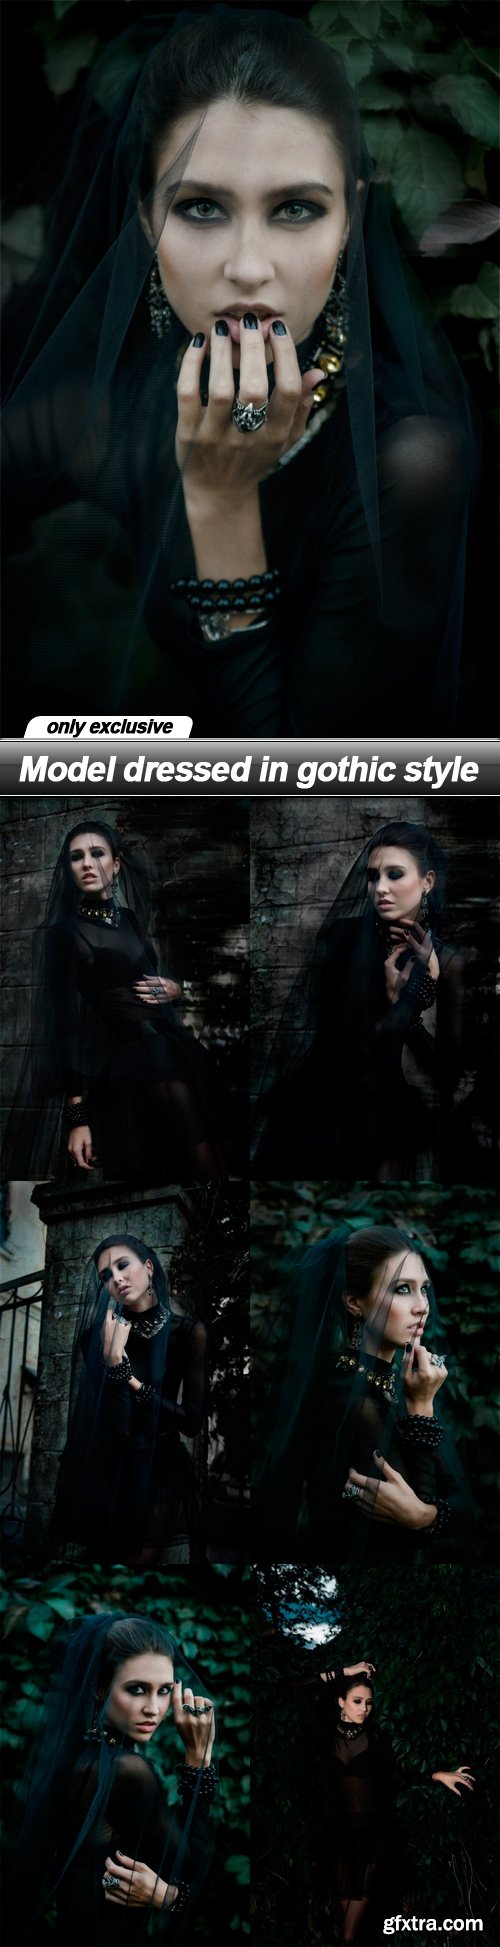 Model dressed in gothic style - 7 UHQ JPEG